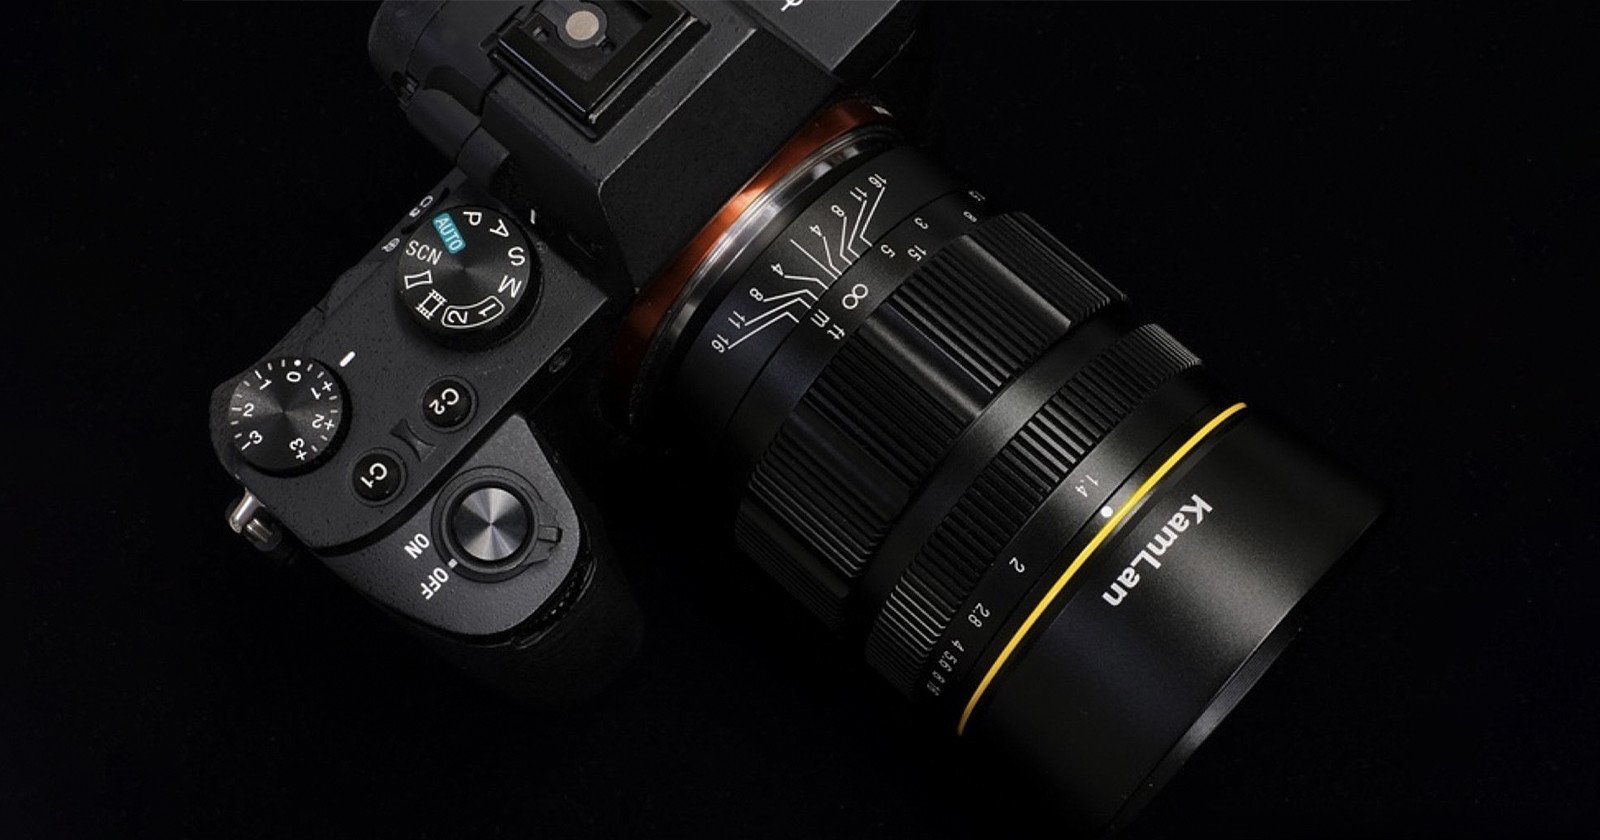 KamLan Unveils 55mm f/1.4 Full Frame Lens for Sony, Nikon, and Canon